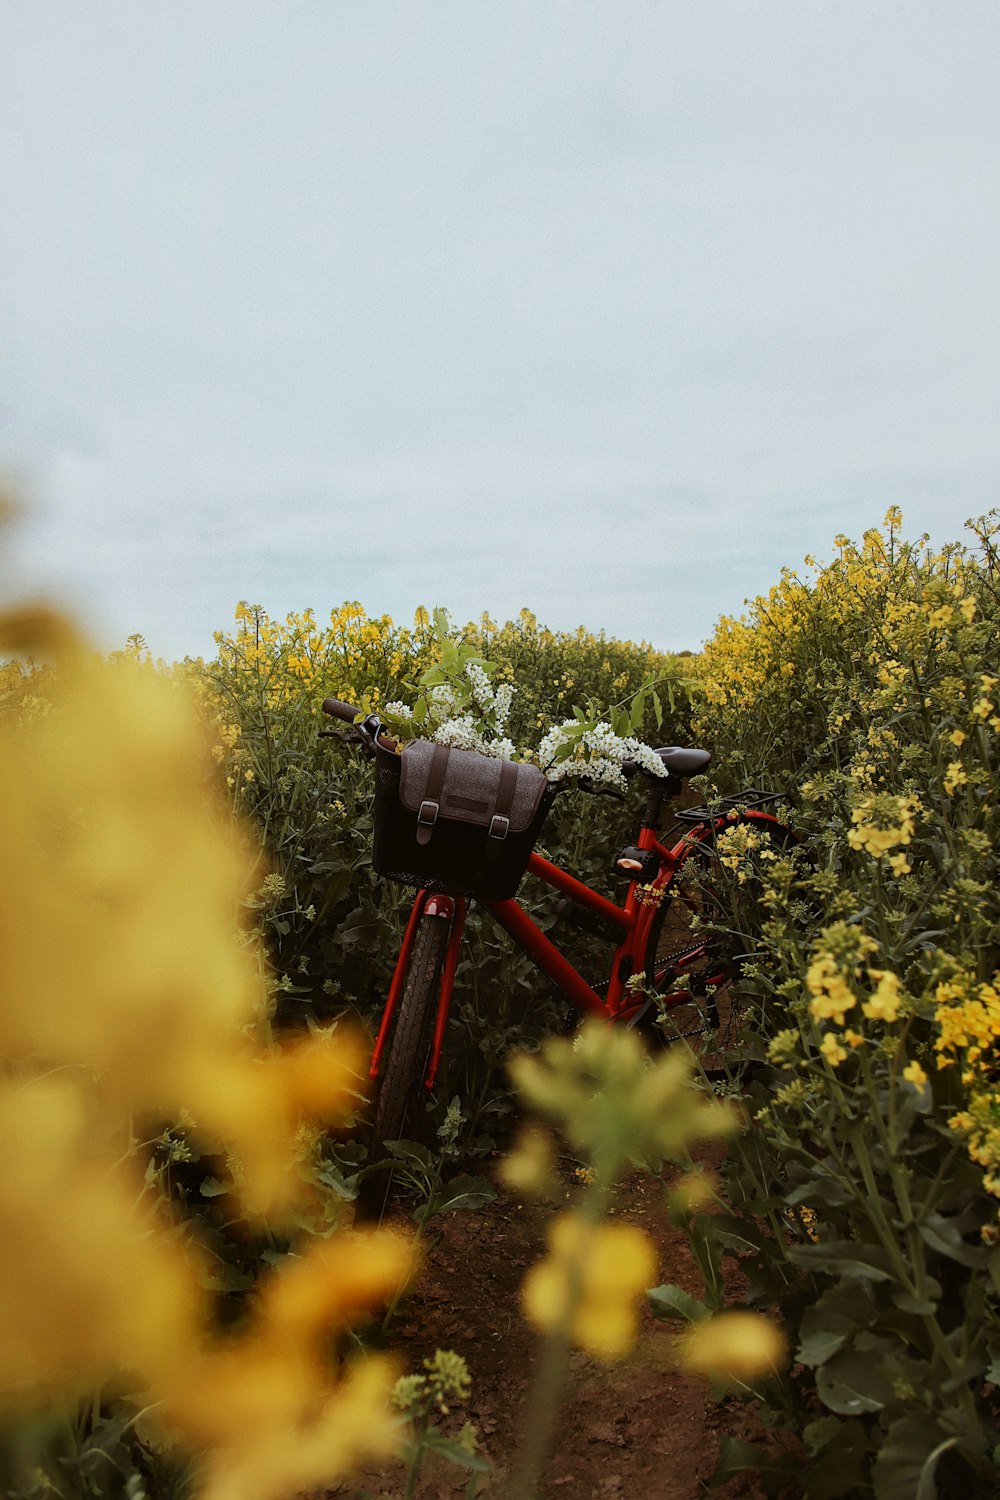 red and black bicycle on yellow flower field during daytime